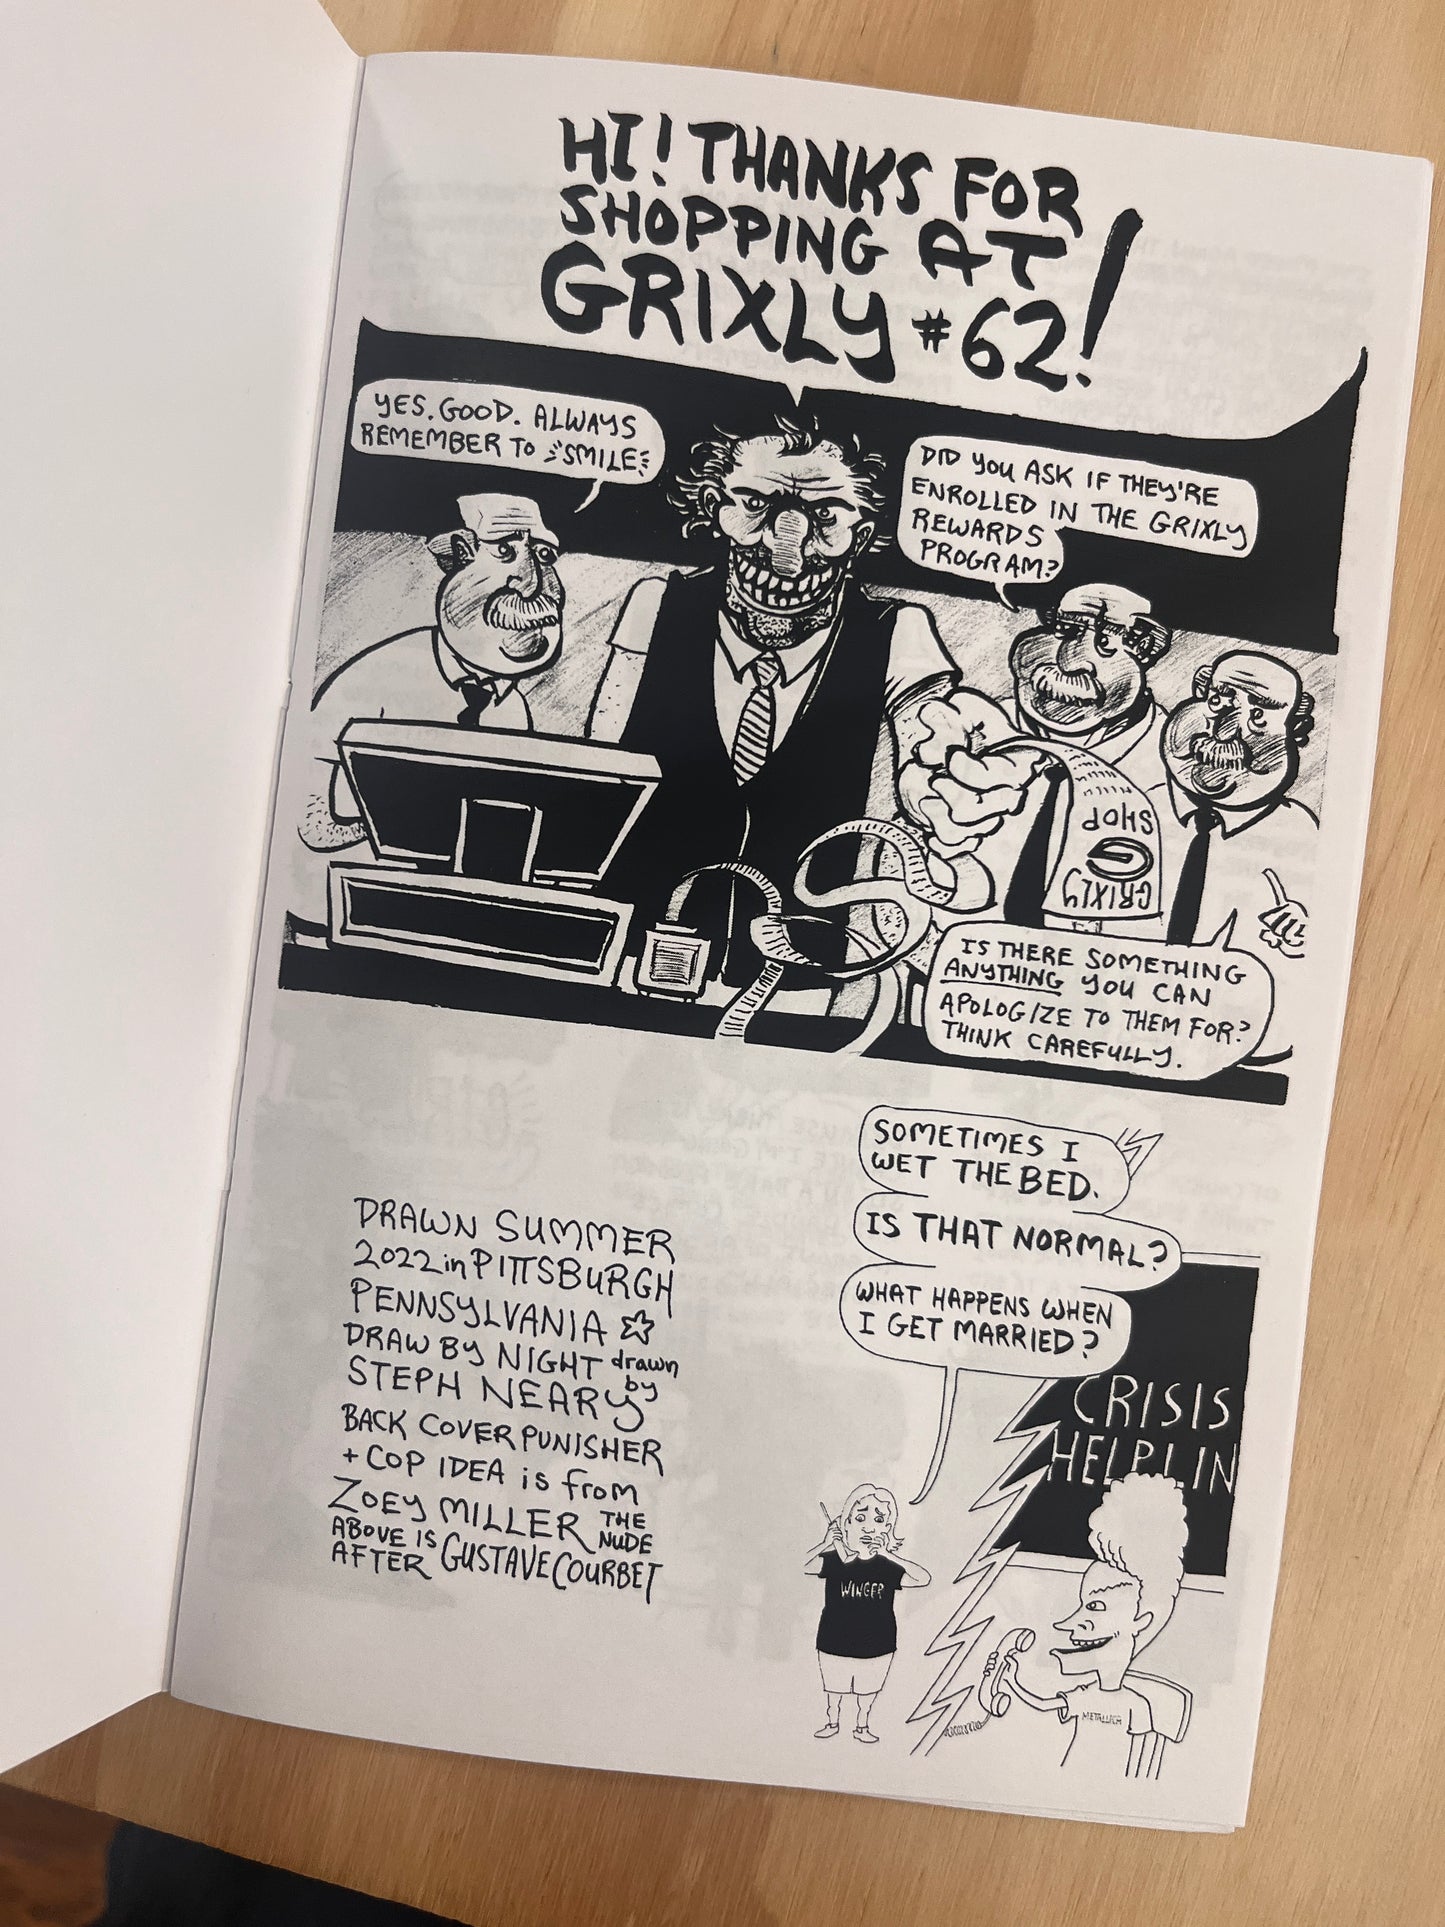 Grixly #62